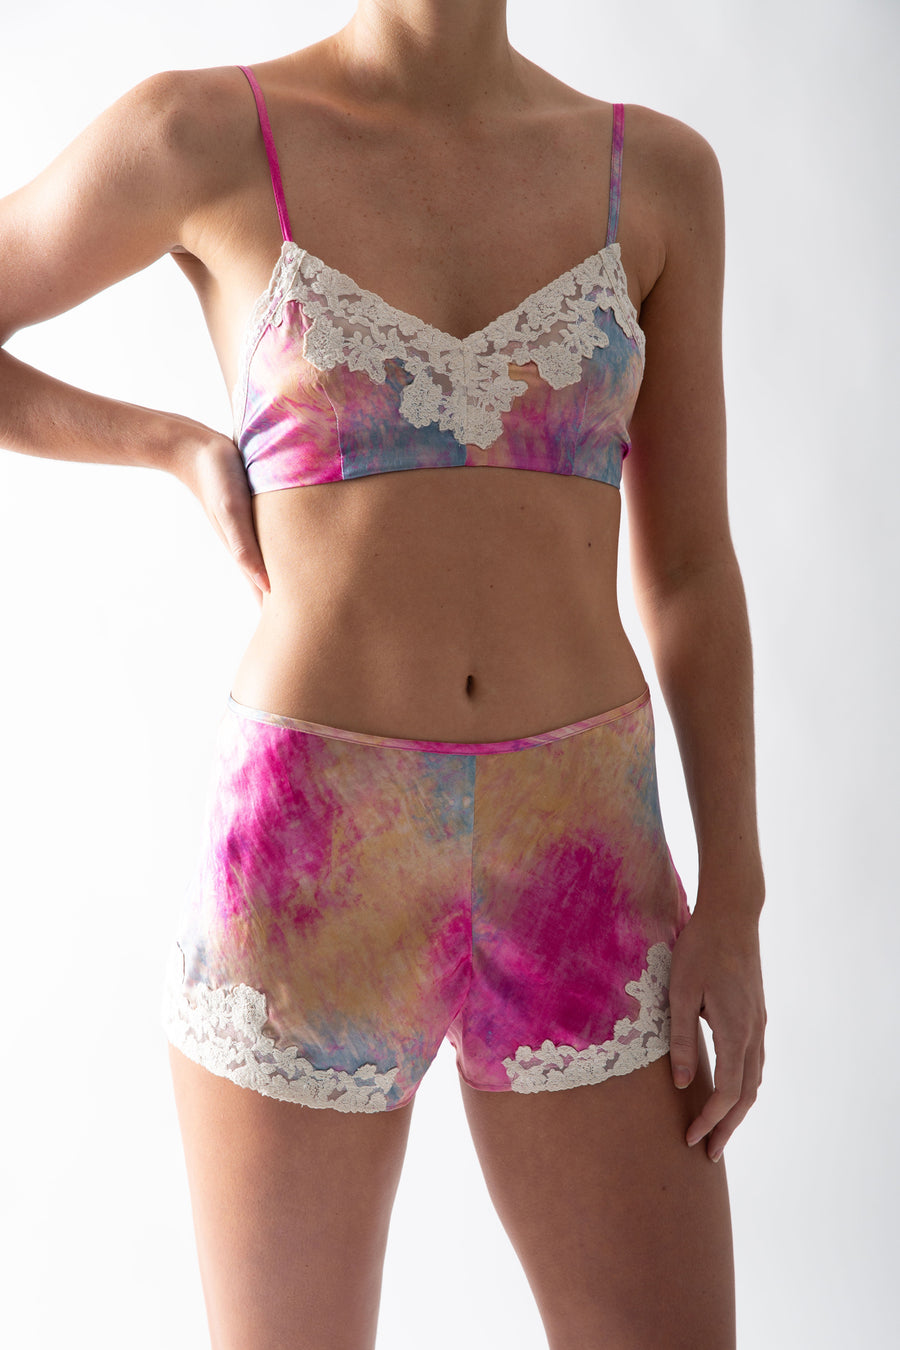 This is a photo of a woman wearing a tie dye silk set of mini shorts and bralette with lace trim.